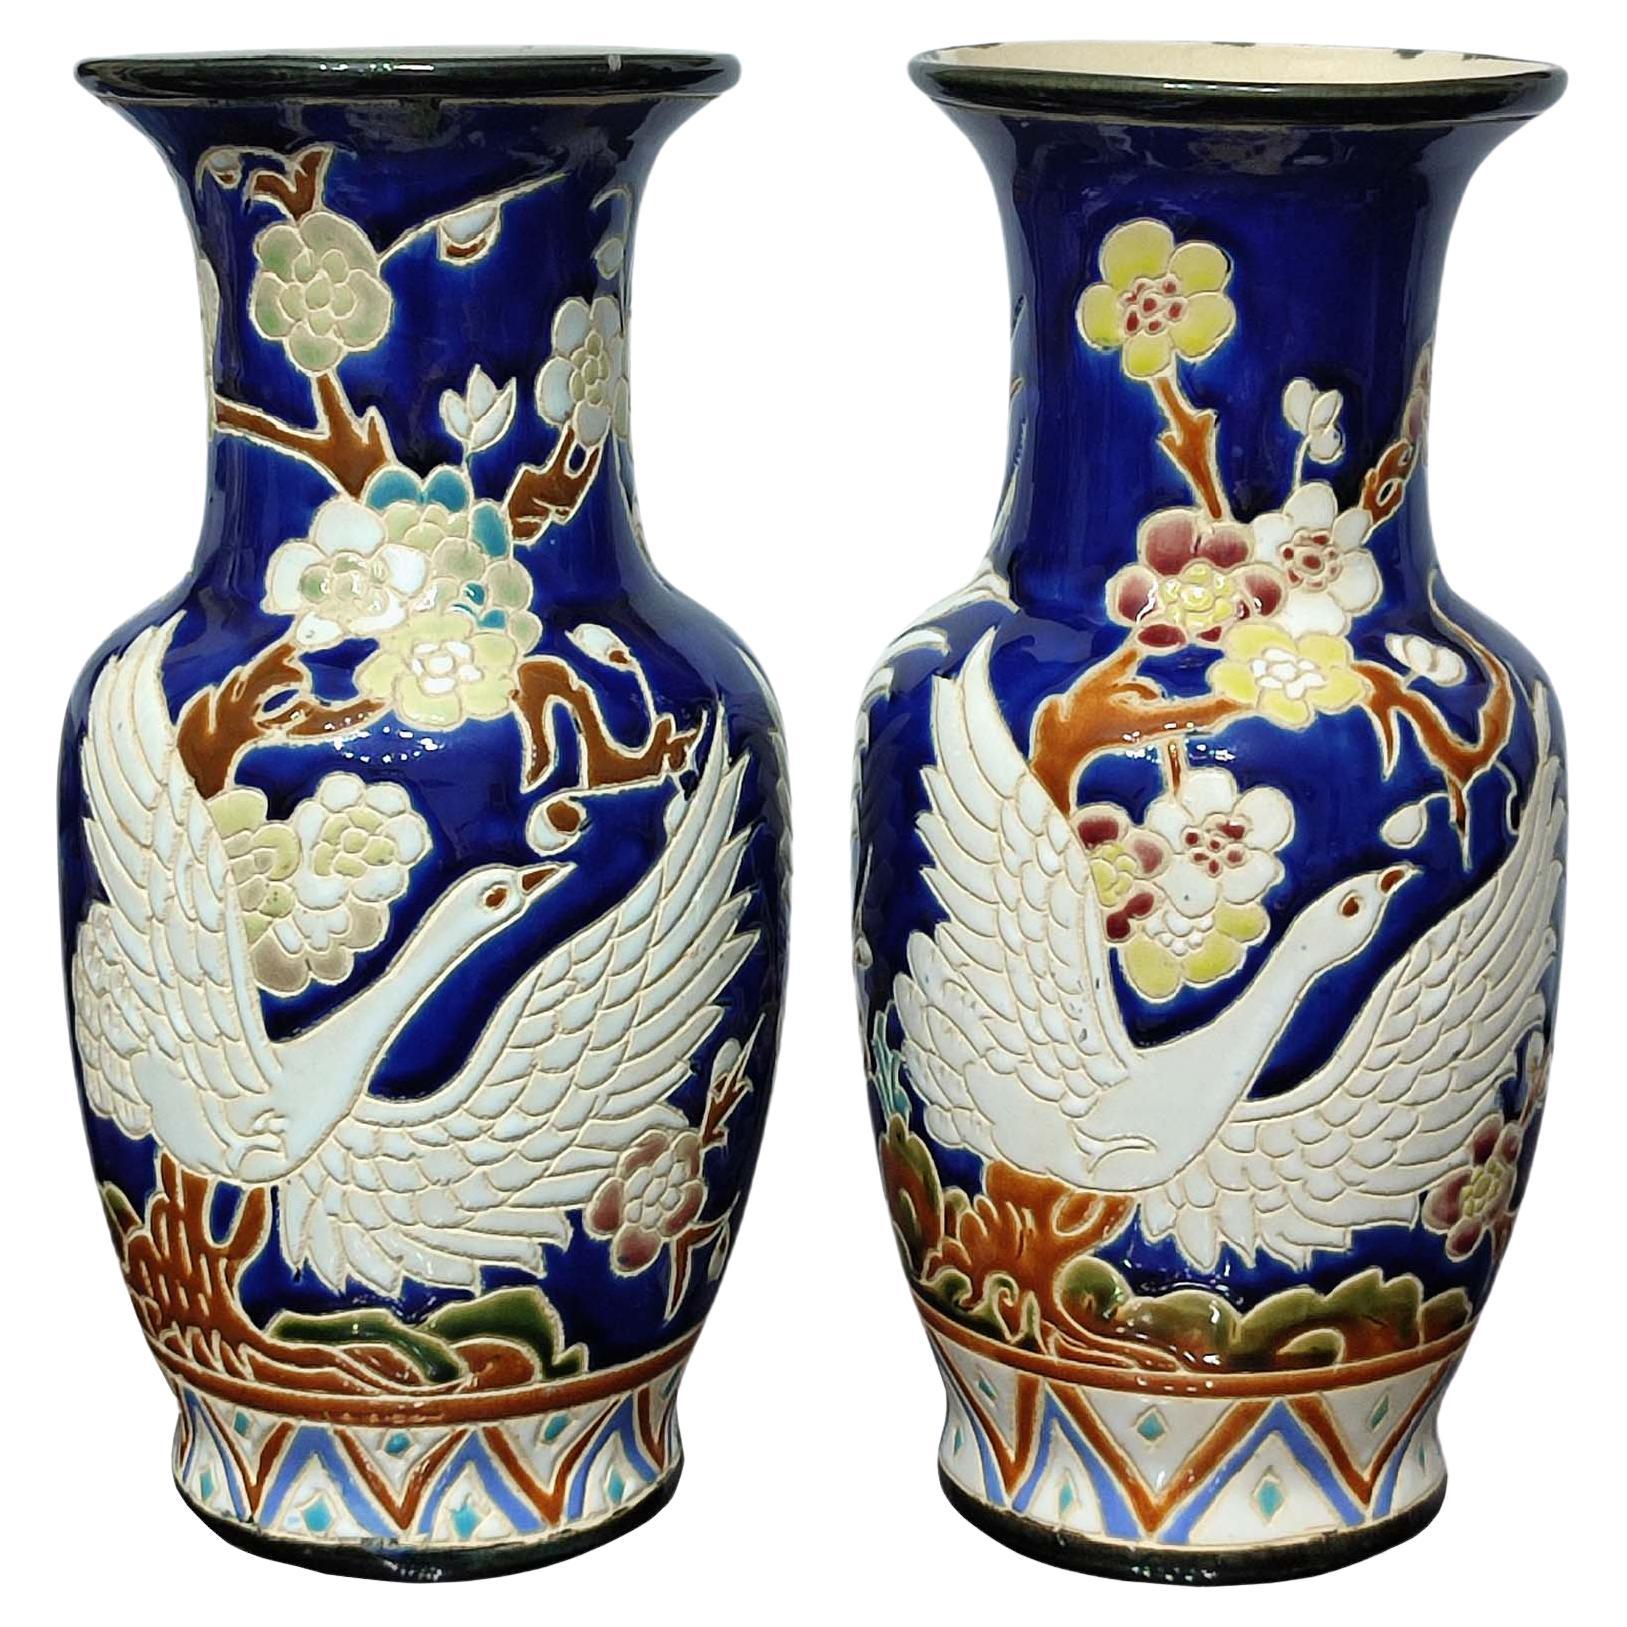 Pair of Ceramic Vases with Wonderful Flying Swans and Cherry Flowers Decor